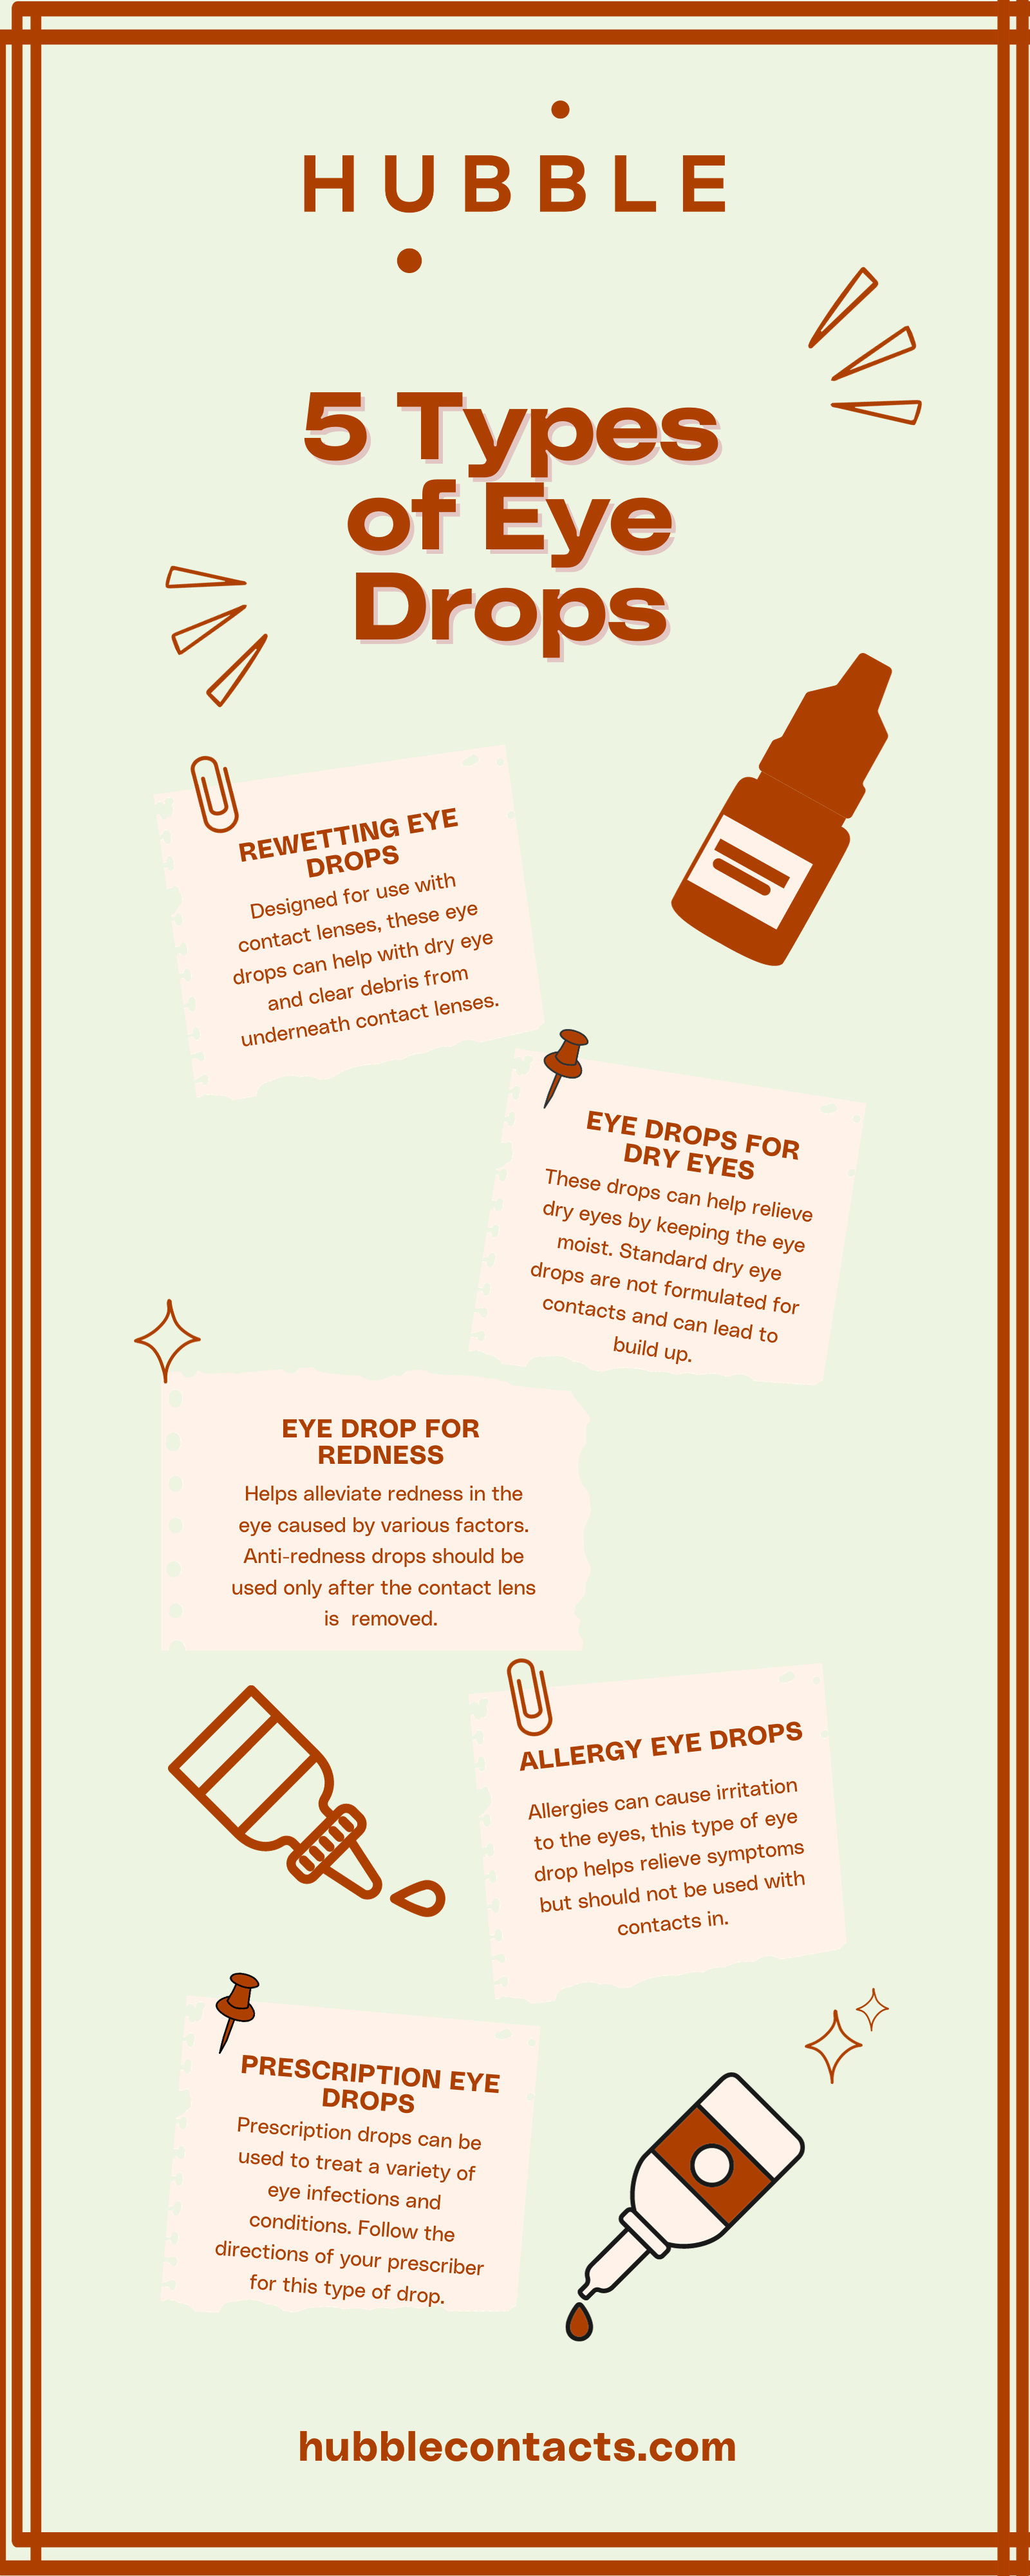 5 Types of Eye Drops Infographic from Hubble Contacts